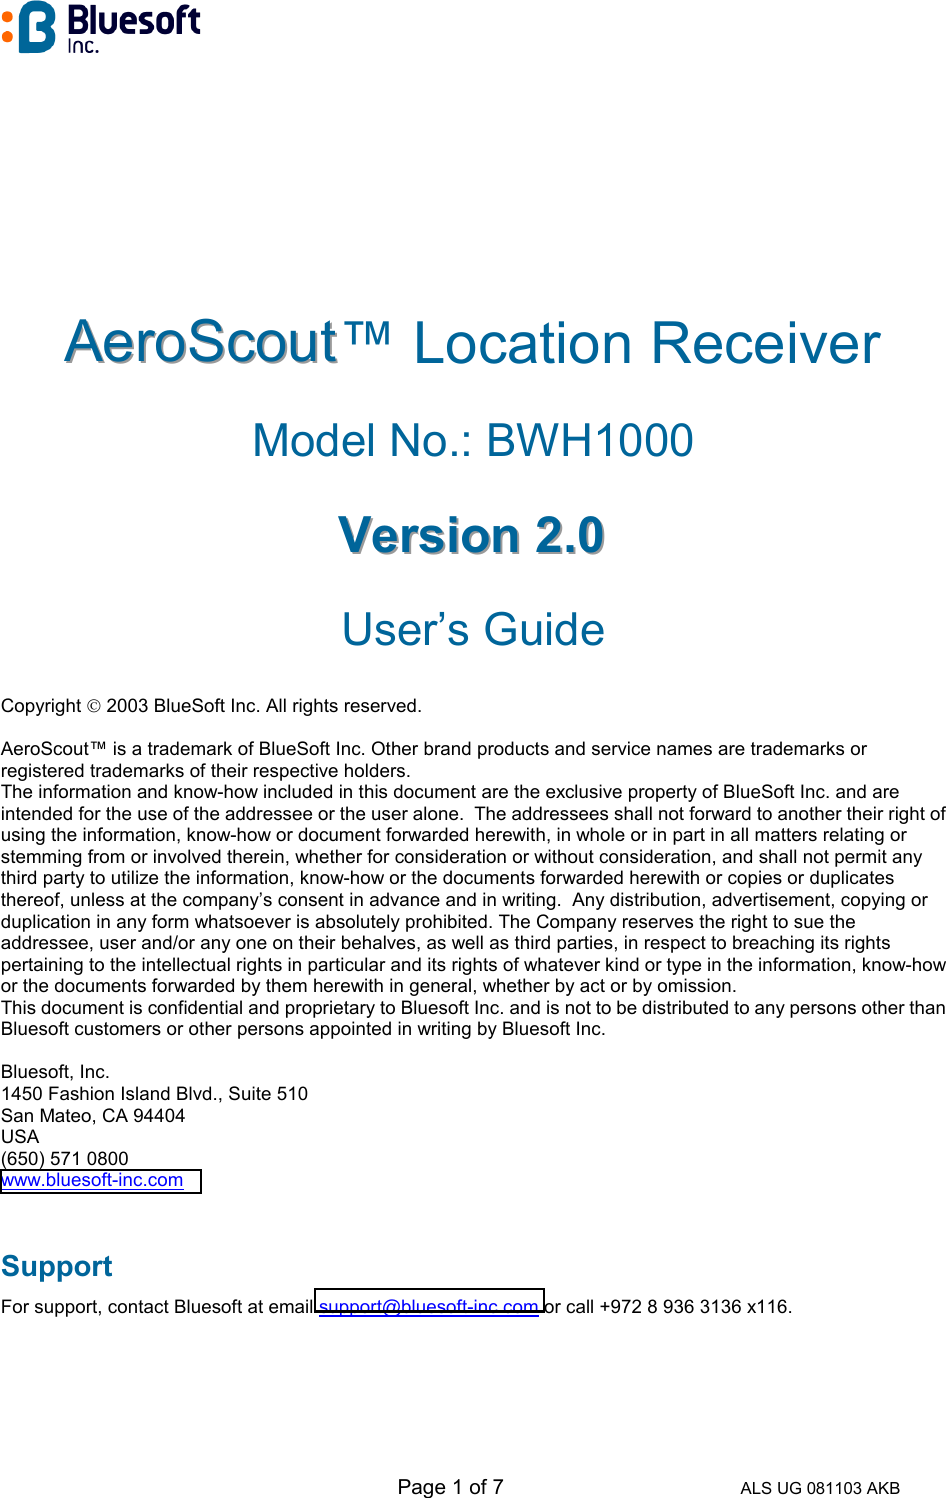   Page 1 of 7 ALS UG 081103 AKB AAAeeerrroooSSScccooouuuttt™ Location Receiver   Model No.: BWH1000 VVVeeerrrsssiiiooonnn   222...000   User’s Guide Copyright  2003 BlueSoft Inc. All rights reserved.  AeroScout™ is a trademark of BlueSoft Inc. Other brand products and service names are trademarks or registered trademarks of their respective holders. The information and know-how included in this document are the exclusive property of BlueSoft Inc. and are intended for the use of the addressee or the user alone.  The addressees shall not forward to another their right of using the information, know-how or document forwarded herewith, in whole or in part in all matters relating or stemming from or involved therein, whether for consideration or without consideration, and shall not permit any third party to utilize the information, know-how or the documents forwarded herewith or copies or duplicates thereof, unless at the company’s consent in advance and in writing.  Any distribution, advertisement, copying or duplication in any form whatsoever is absolutely prohibited. The Company reserves the right to sue the addressee, user and/or any one on their behalves, as well as third parties, in respect to breaching its rights pertaining to the intellectual rights in particular and its rights of whatever kind or type in the information, know-how or the documents forwarded by them herewith in general, whether by act or by omission. This document is confidential and proprietary to Bluesoft Inc. and is not to be distributed to any persons other than Bluesoft customers or other persons appointed in writing by Bluesoft Inc.  Bluesoft, Inc. 1450 Fashion Island Blvd., Suite 510 San Mateo, CA 94404 USA (650) 571 0800 www.bluesoft-inc.com  Support For support, contact Bluesoft at email support@bluesoft-inc.com or call +972 8 936 3136 x116.   